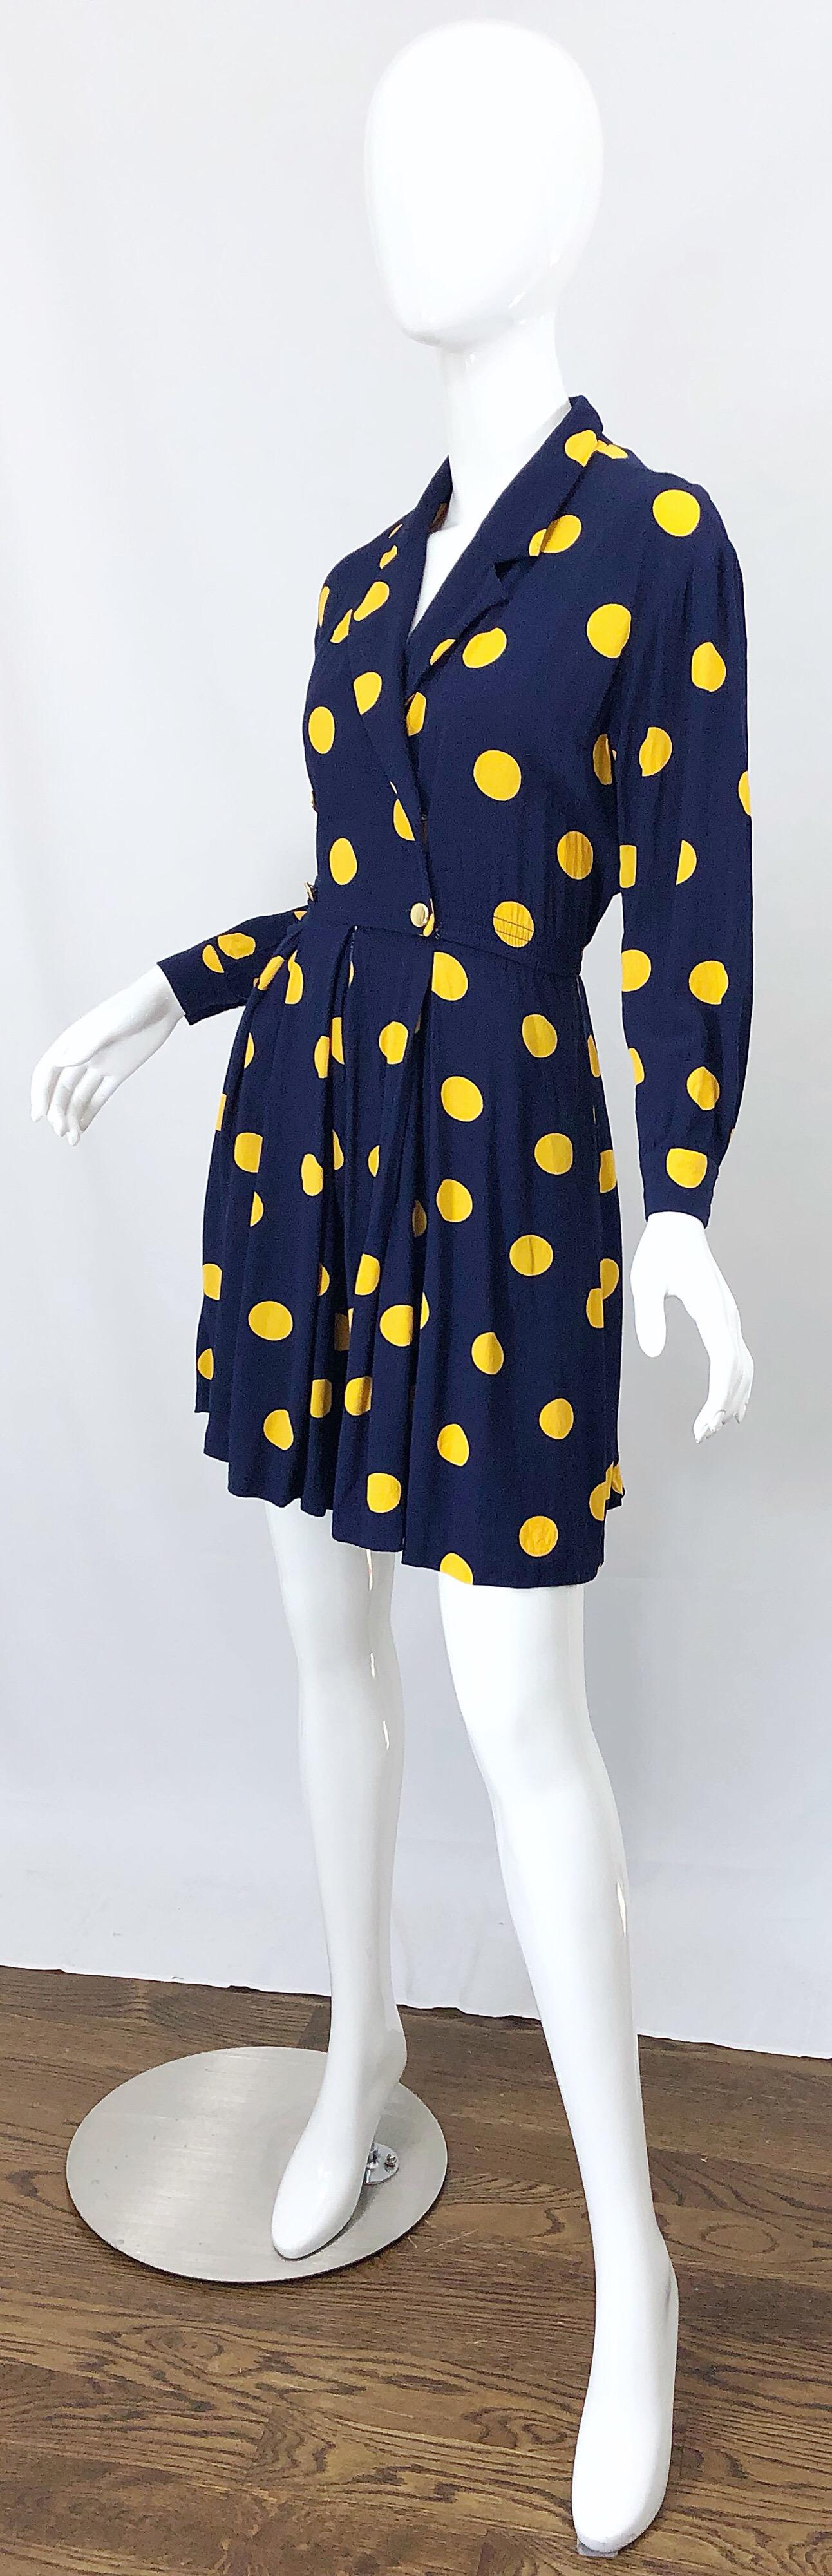 Black Size 8 Romper Late 1980s Navy Blue and Yellow Polka Dot 80s Vintage Romper